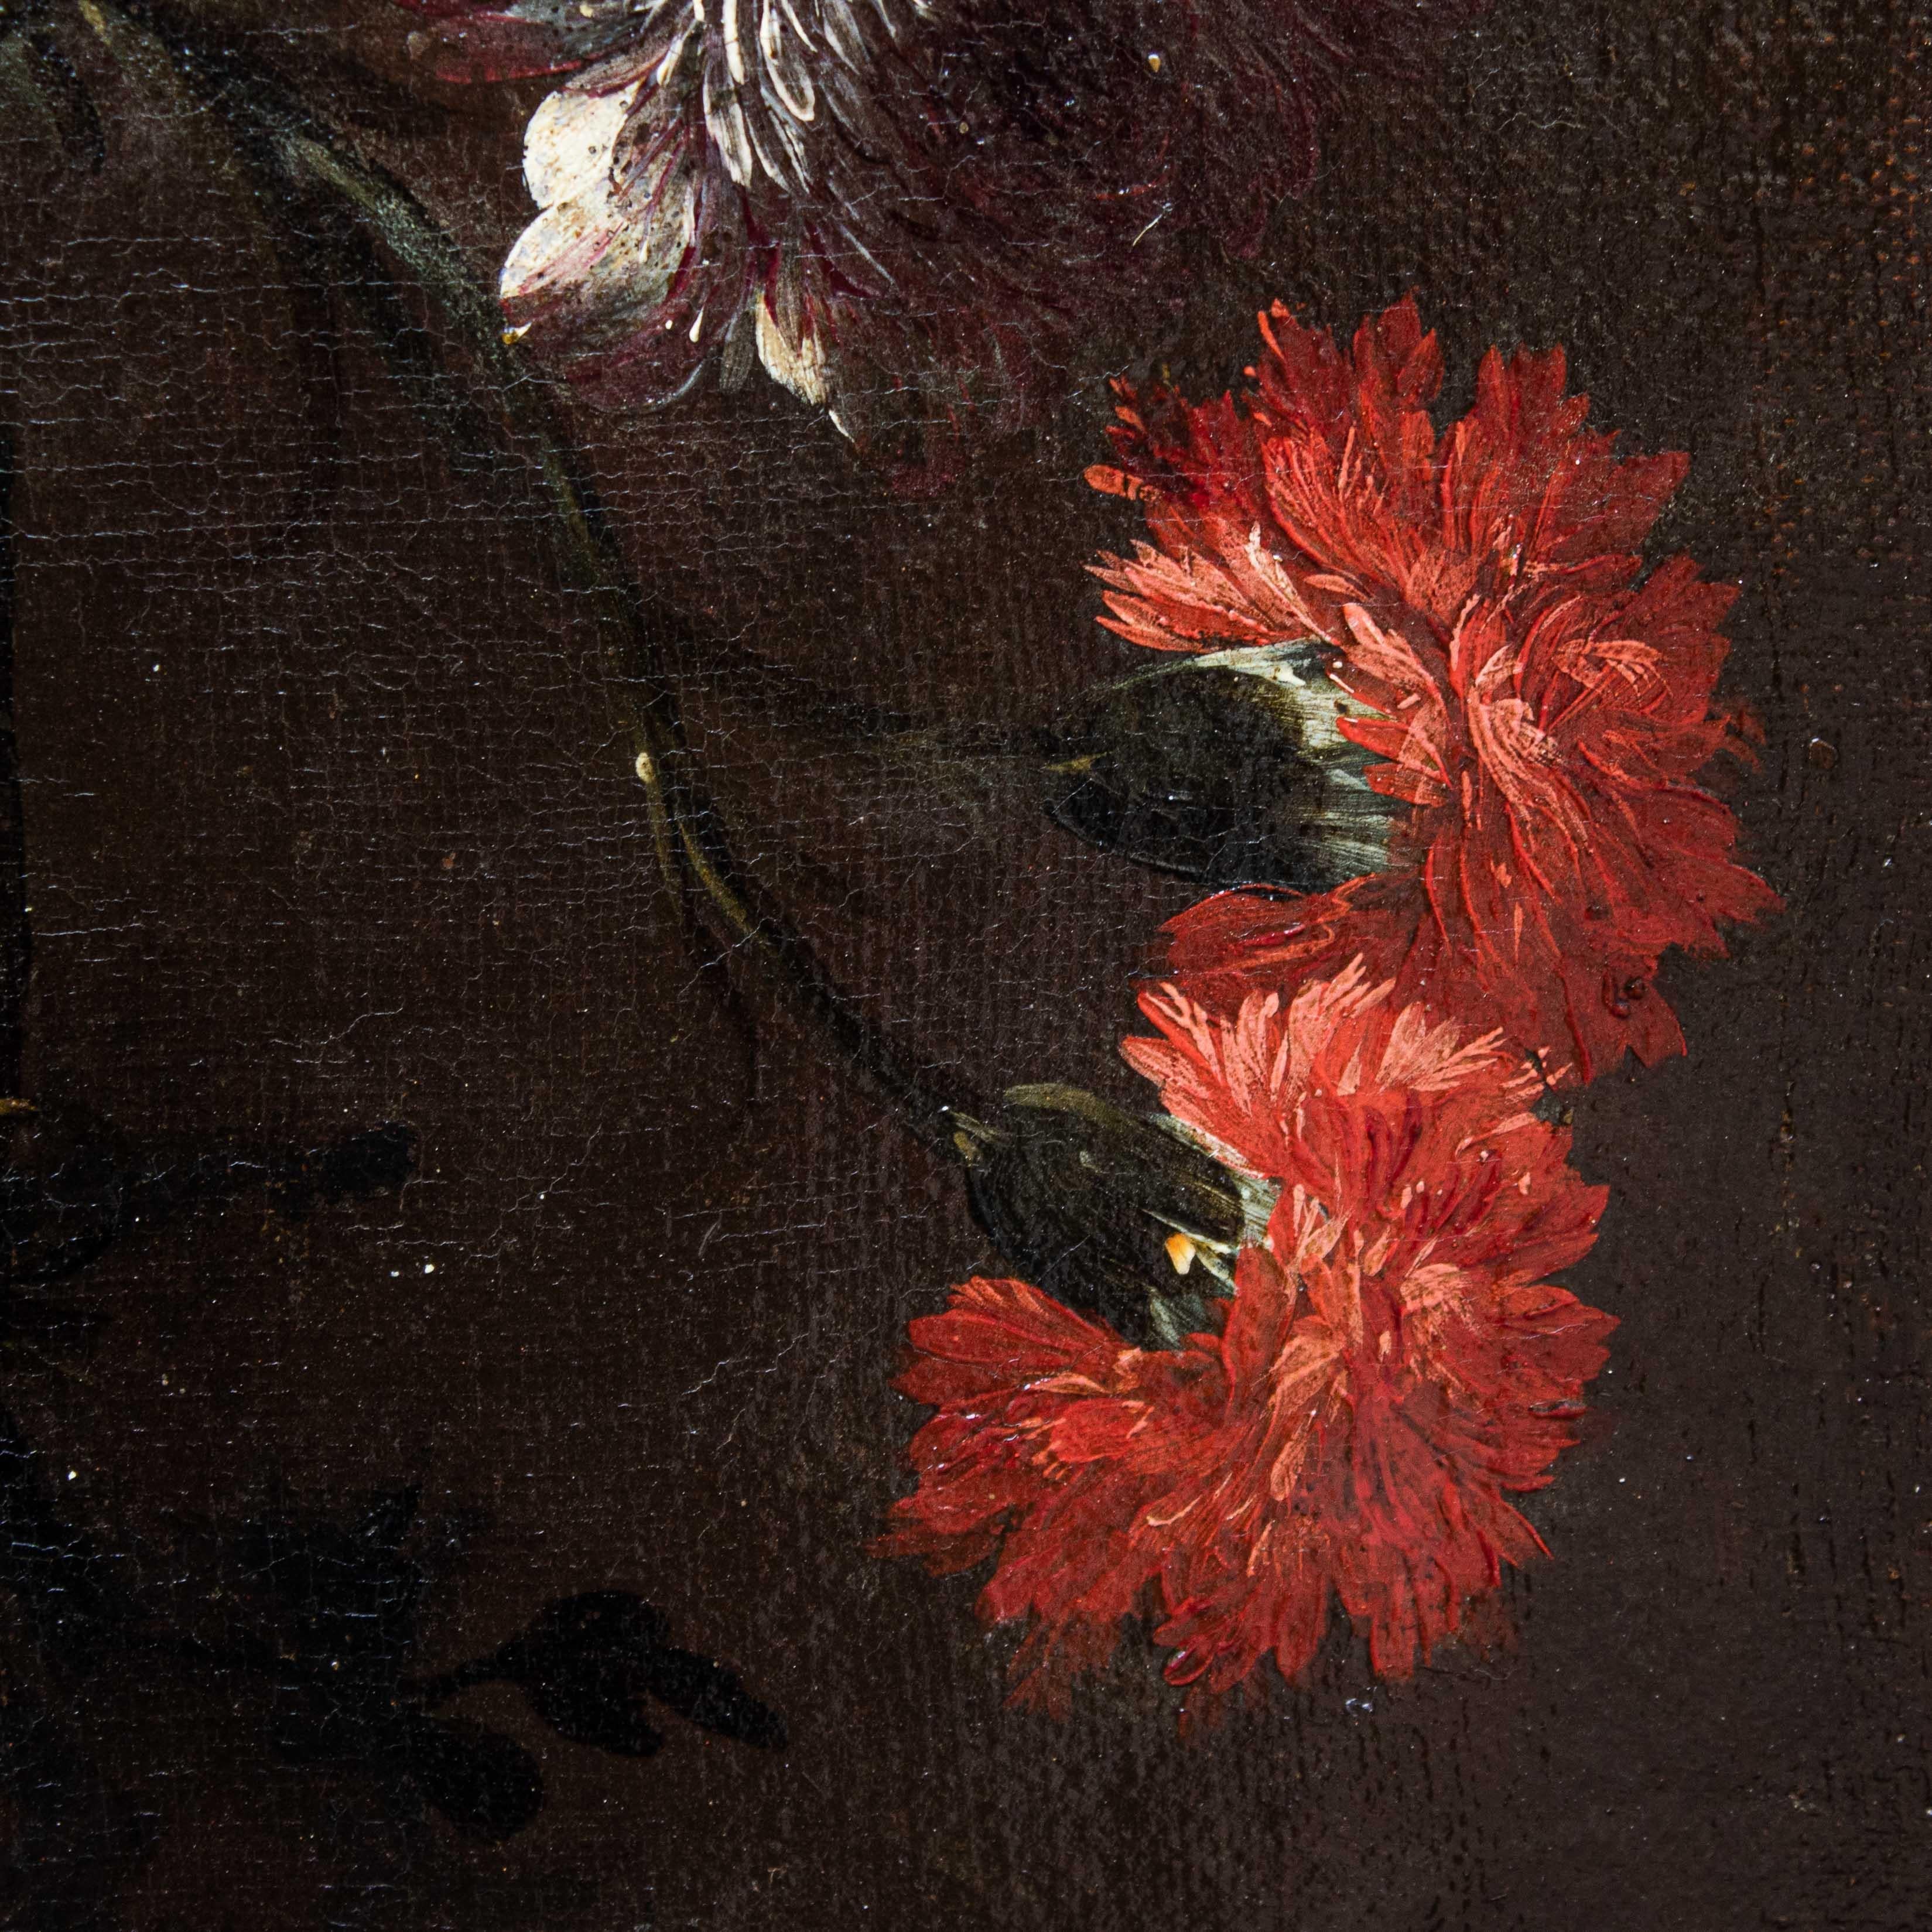 Canvas 17th Century Still life with vase of flowers Painting Oil on canvas Neapolitan